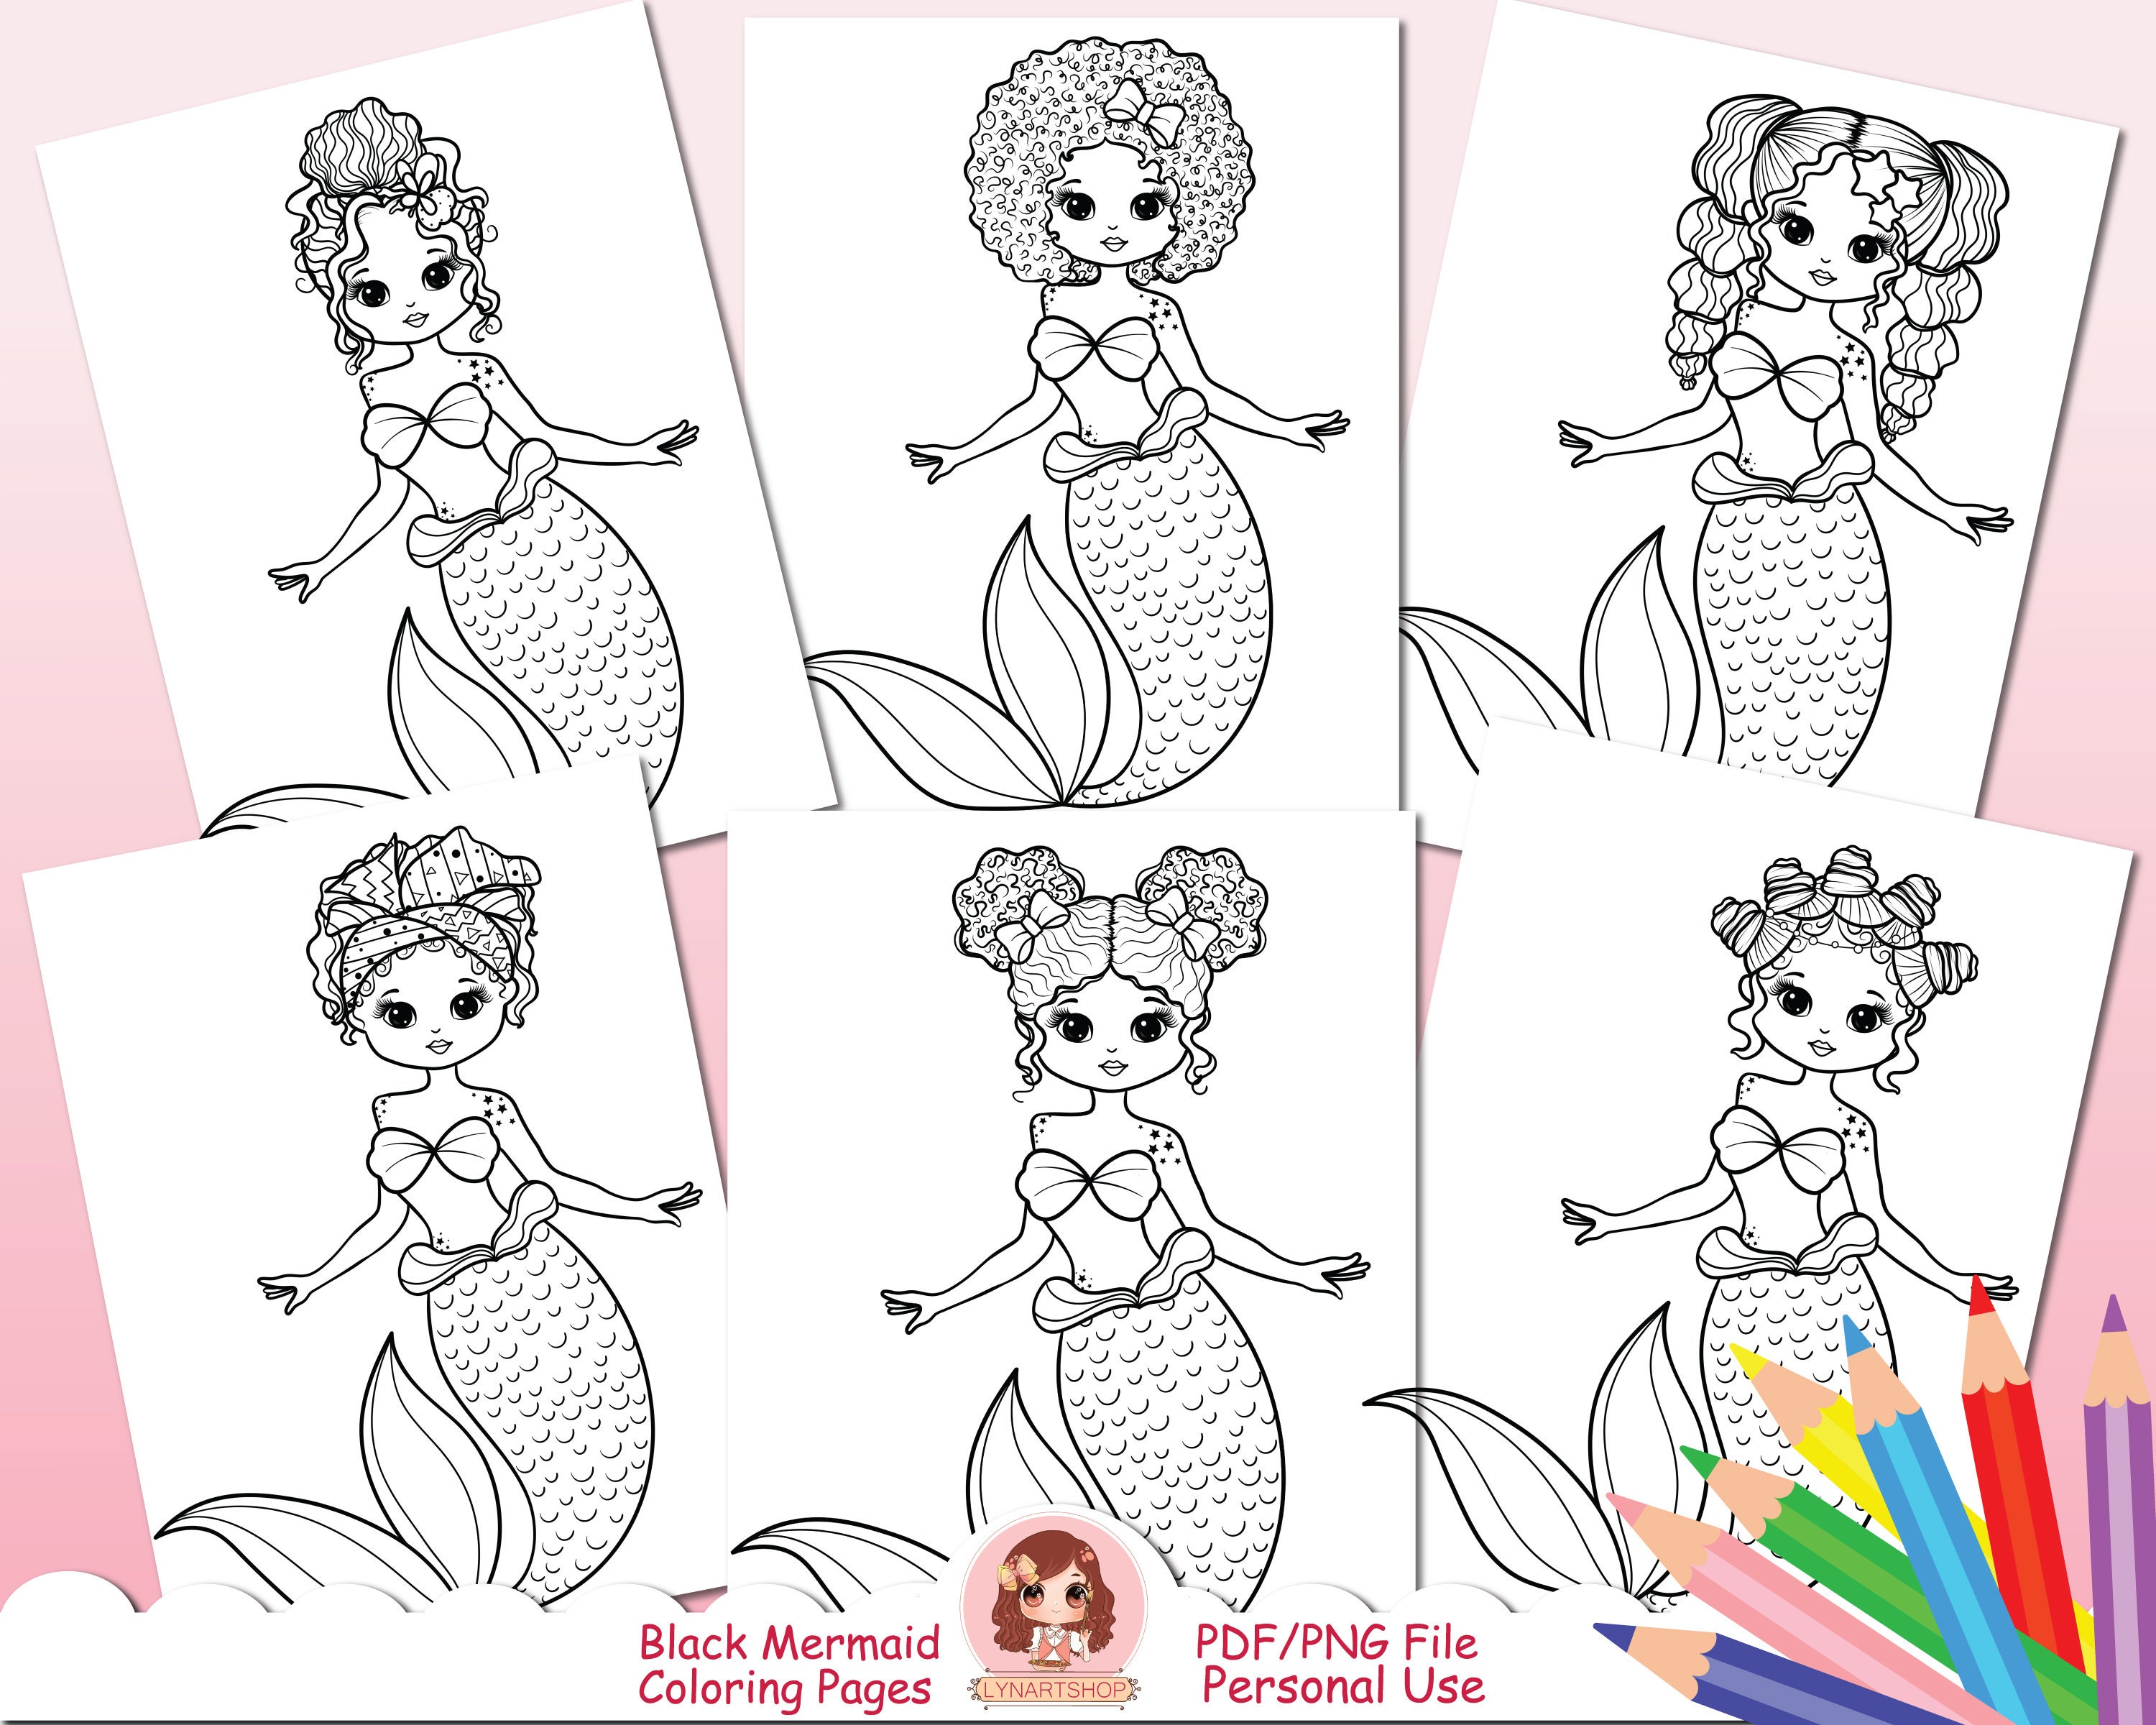 Mermaid Coloring Book for Kids Ages 8-12 Graphic by Salam Store